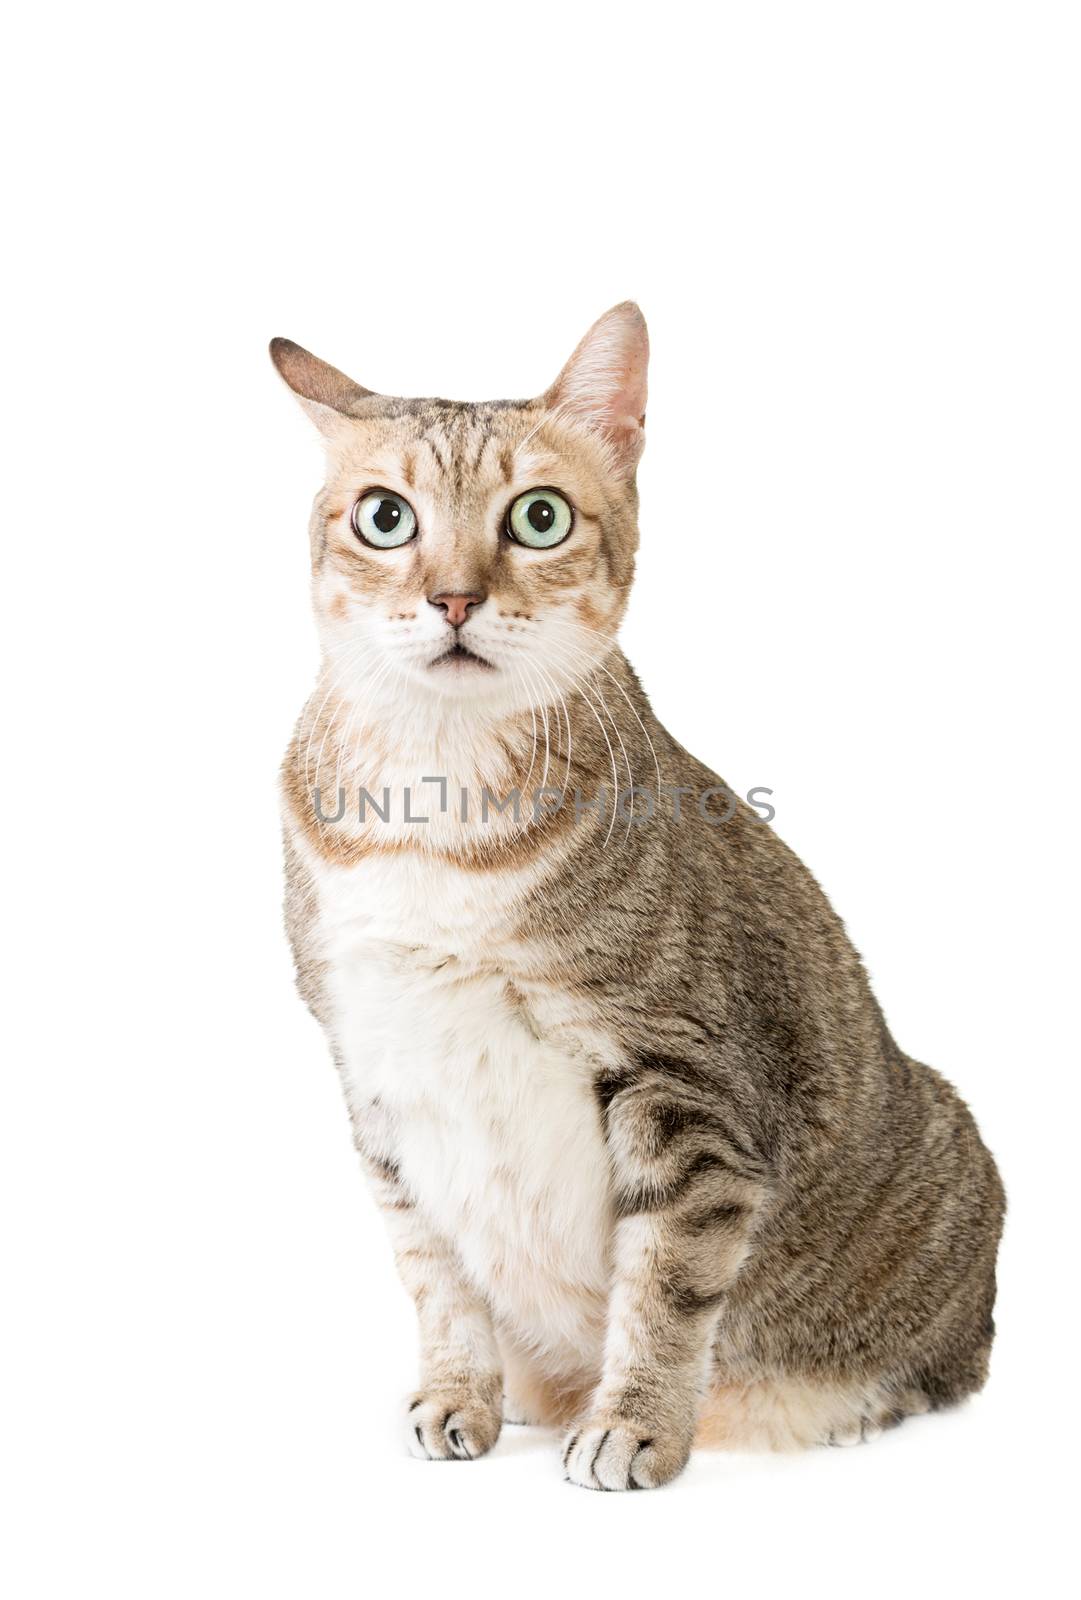 Cute tabby cat with curious expression, full length portrait isolated on white background.